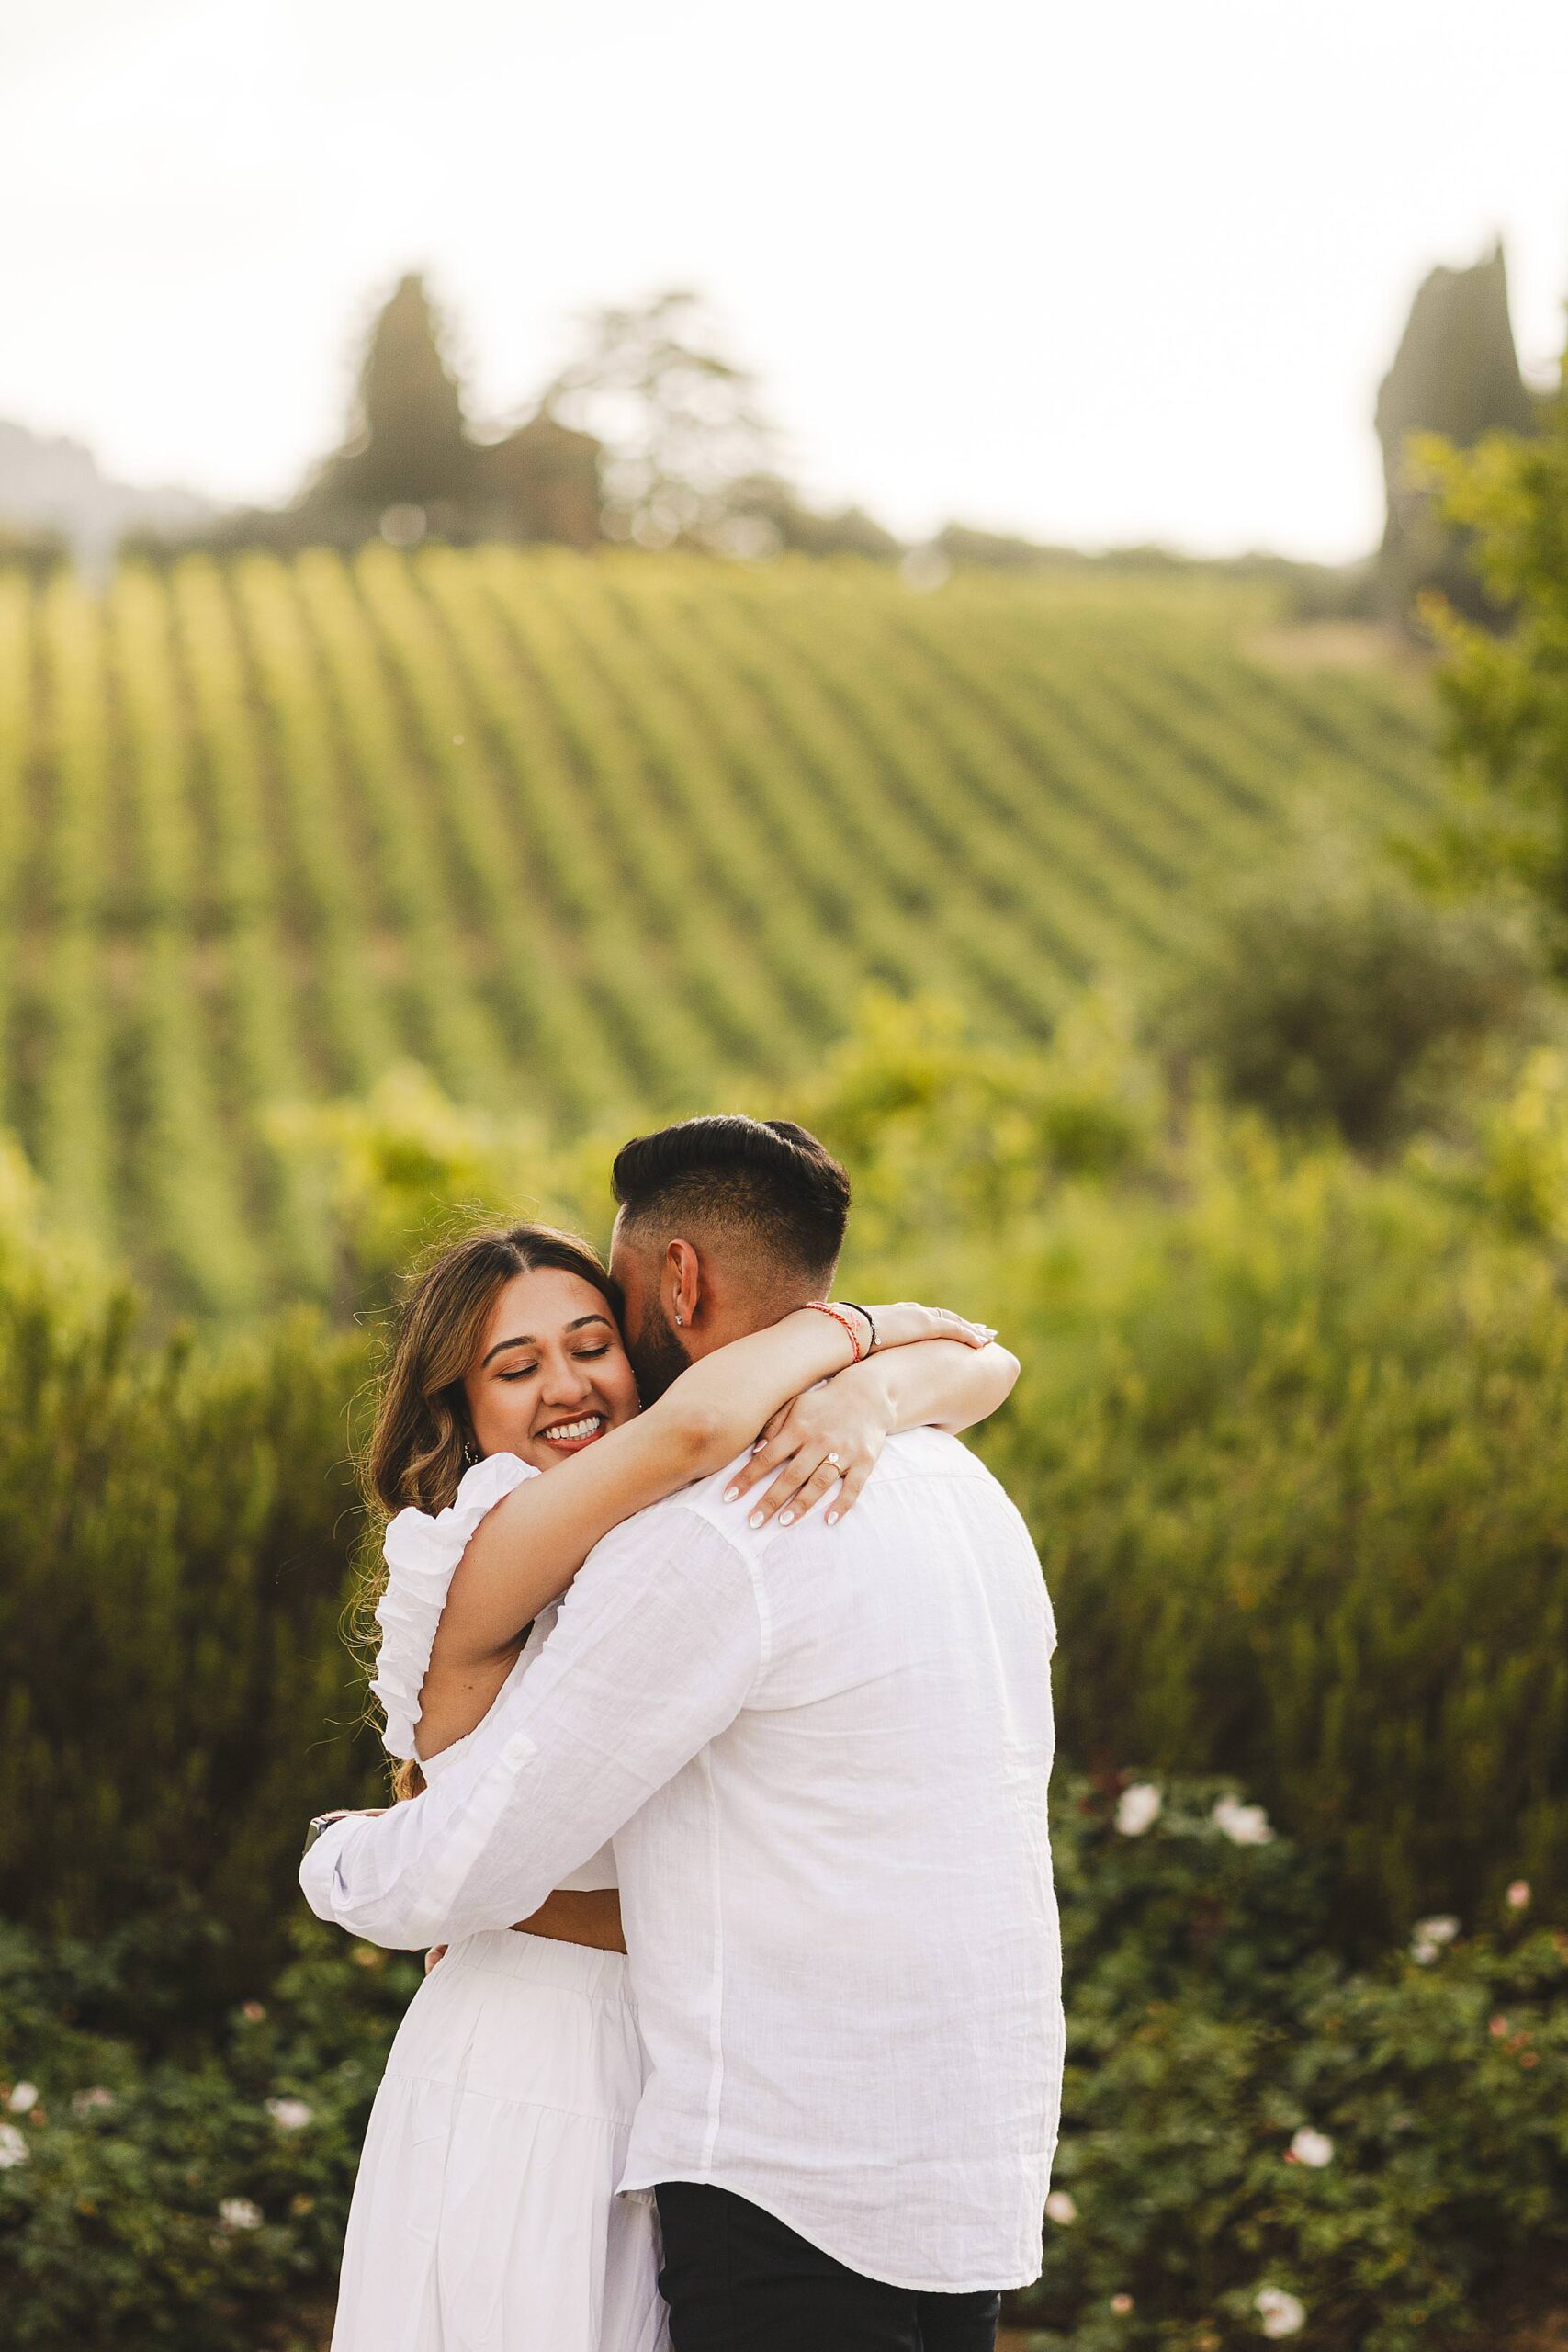 Exciting and fun engagement photo session in the heart of Chianti countryside at Borgo del Cabreo